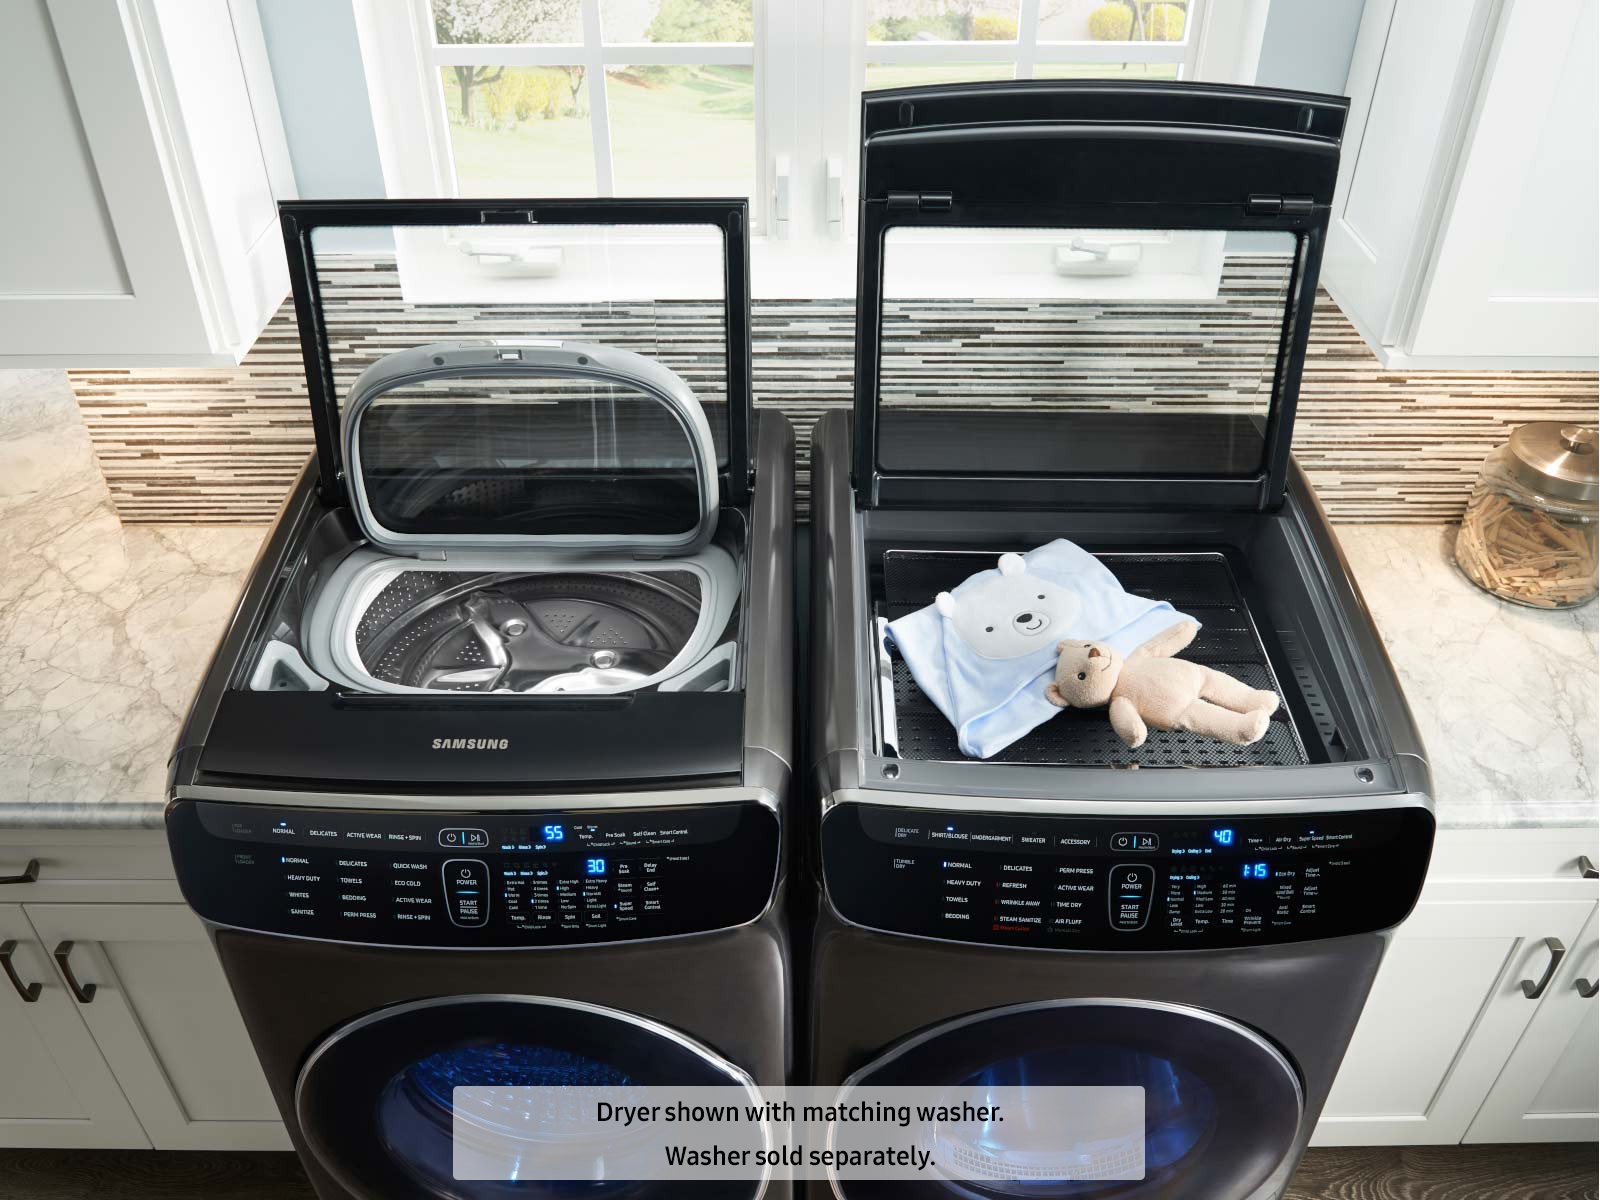 The 5 best washers of 2022: Top washing machines